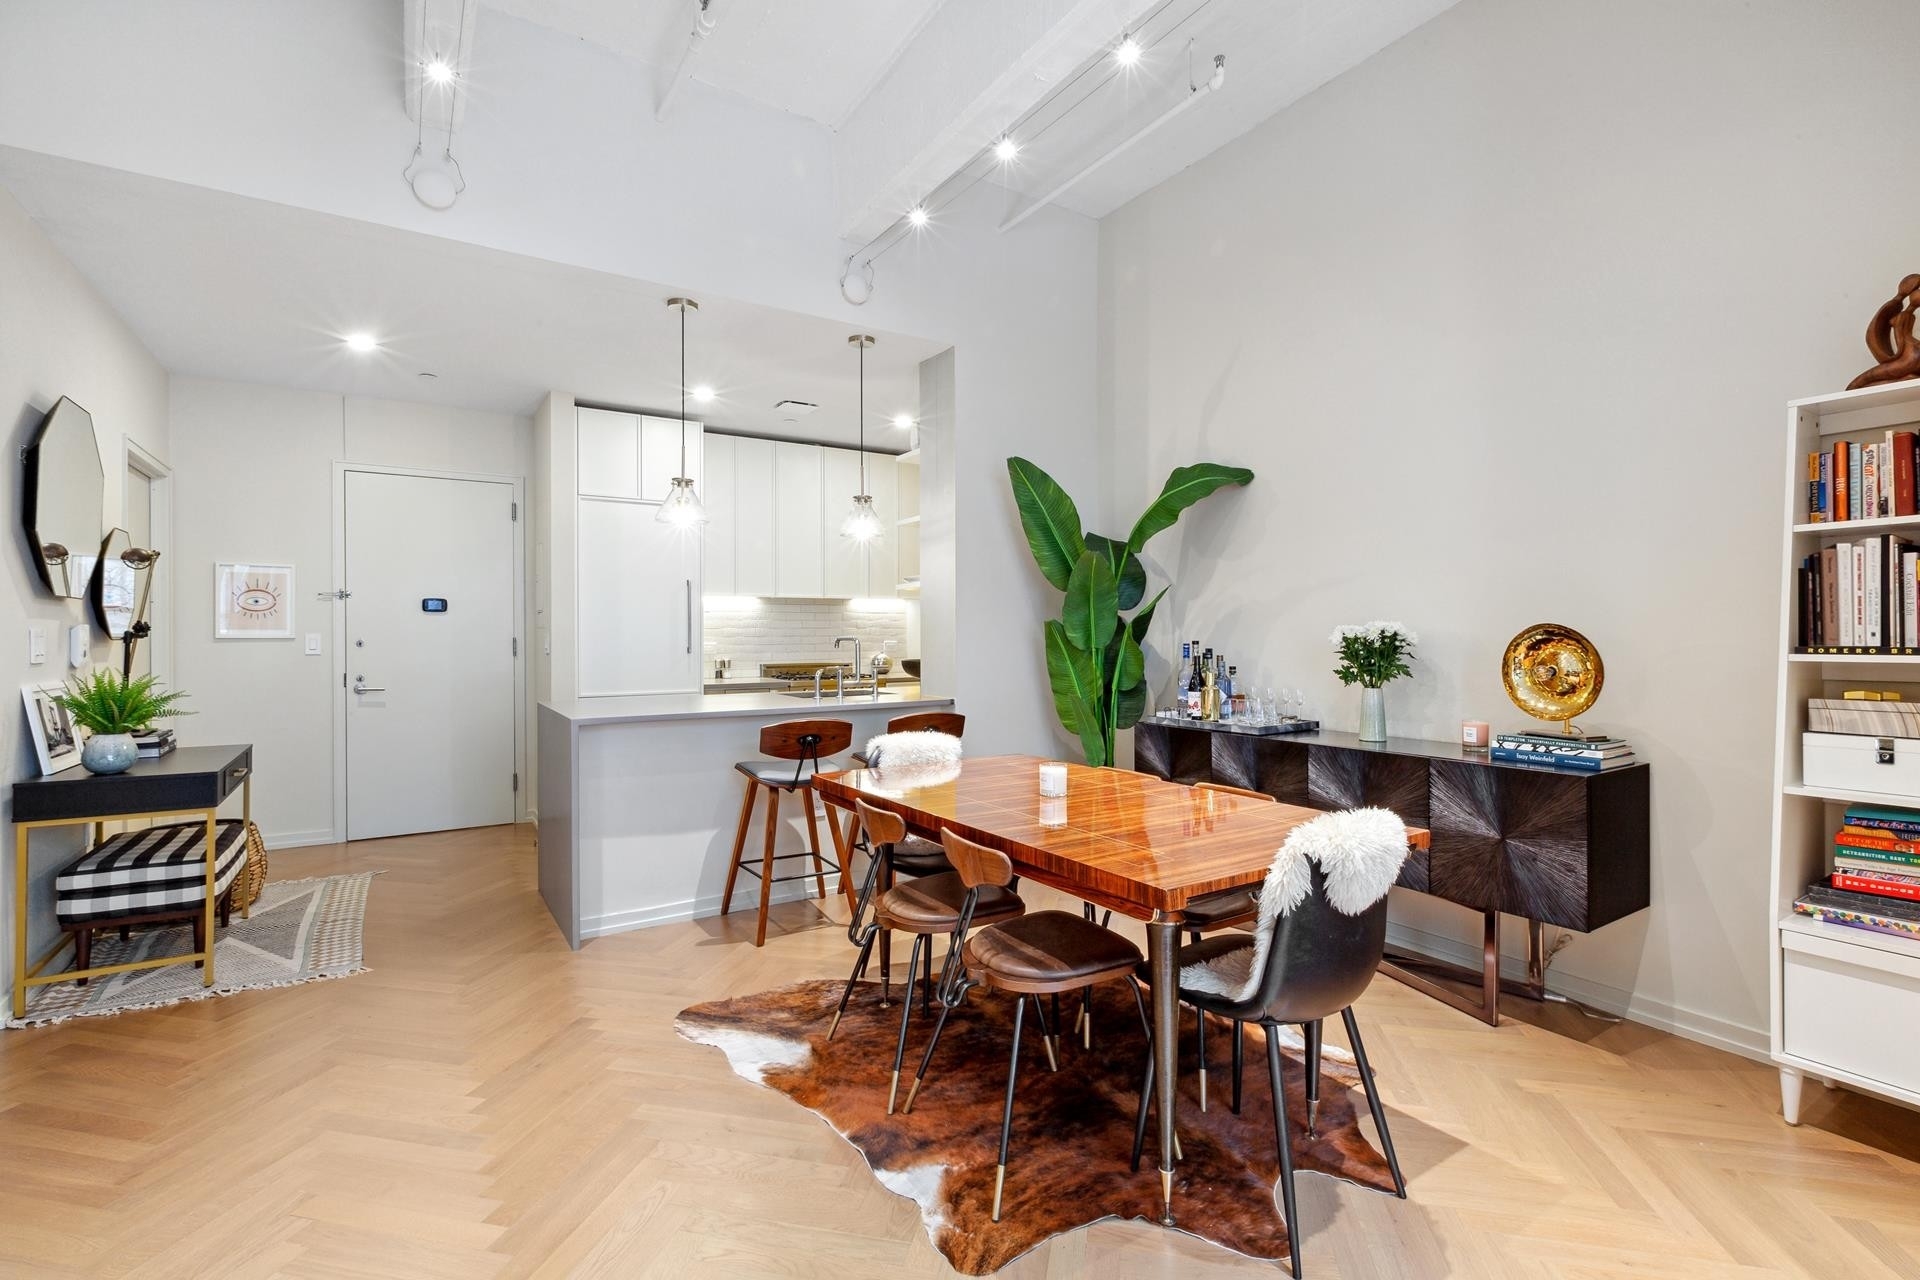 3. Condominiums for Sale at Austin Nichols House, 184 KENT AVE, A408 Williamsburg, Brooklyn, NY 11249